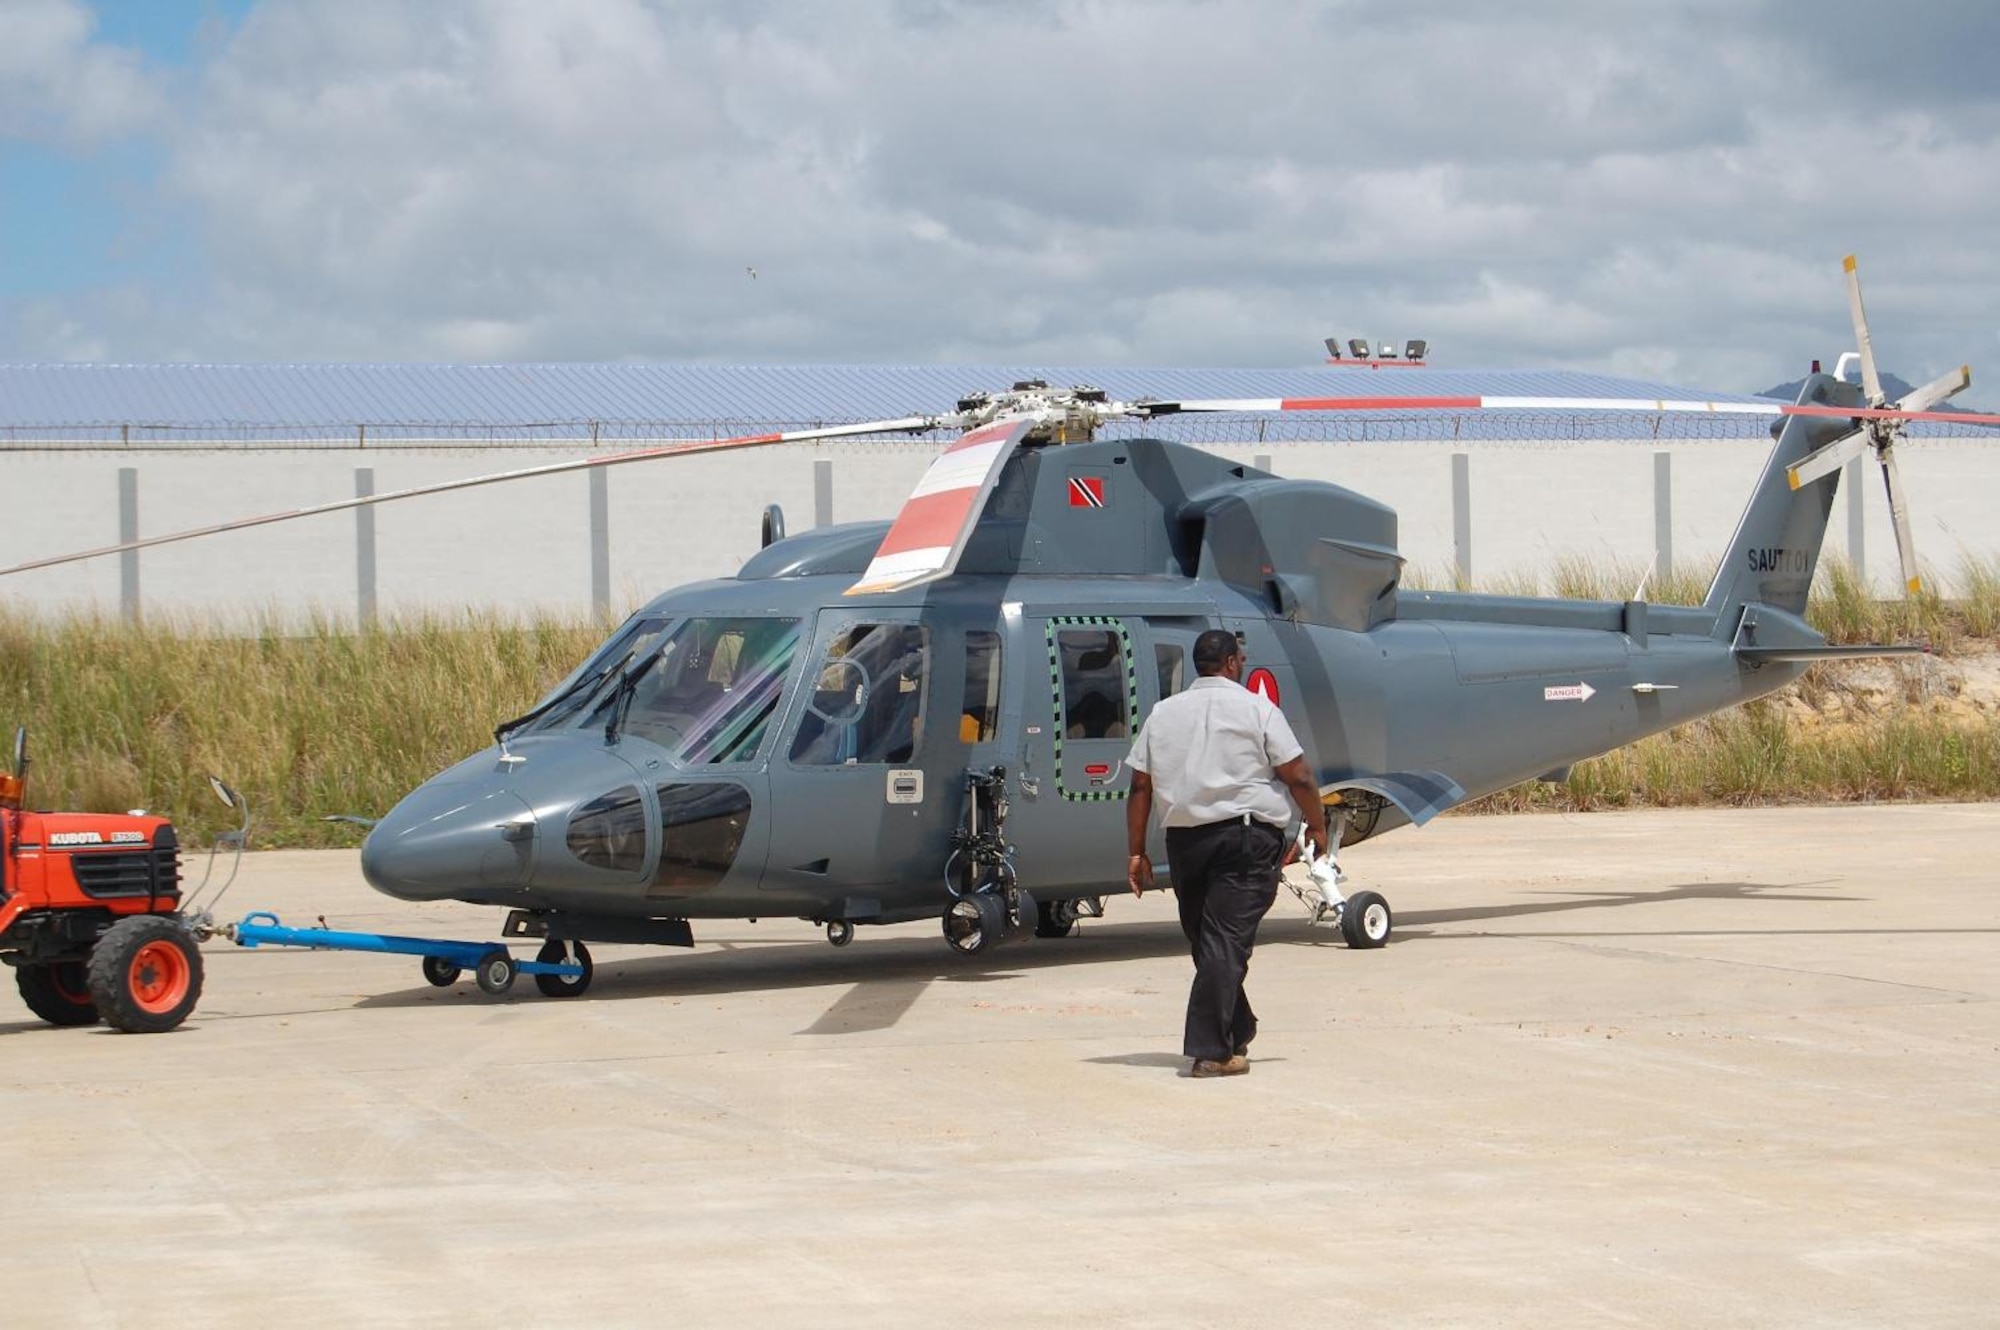 Capt. Jason Rooks, 960 AACS, was escorted around Trinidad in a Special Unit Air Assault Team helicopter with high fidelity optics and sensors. (US Air Force Photo courtesy of Capt. Jason Rooks)